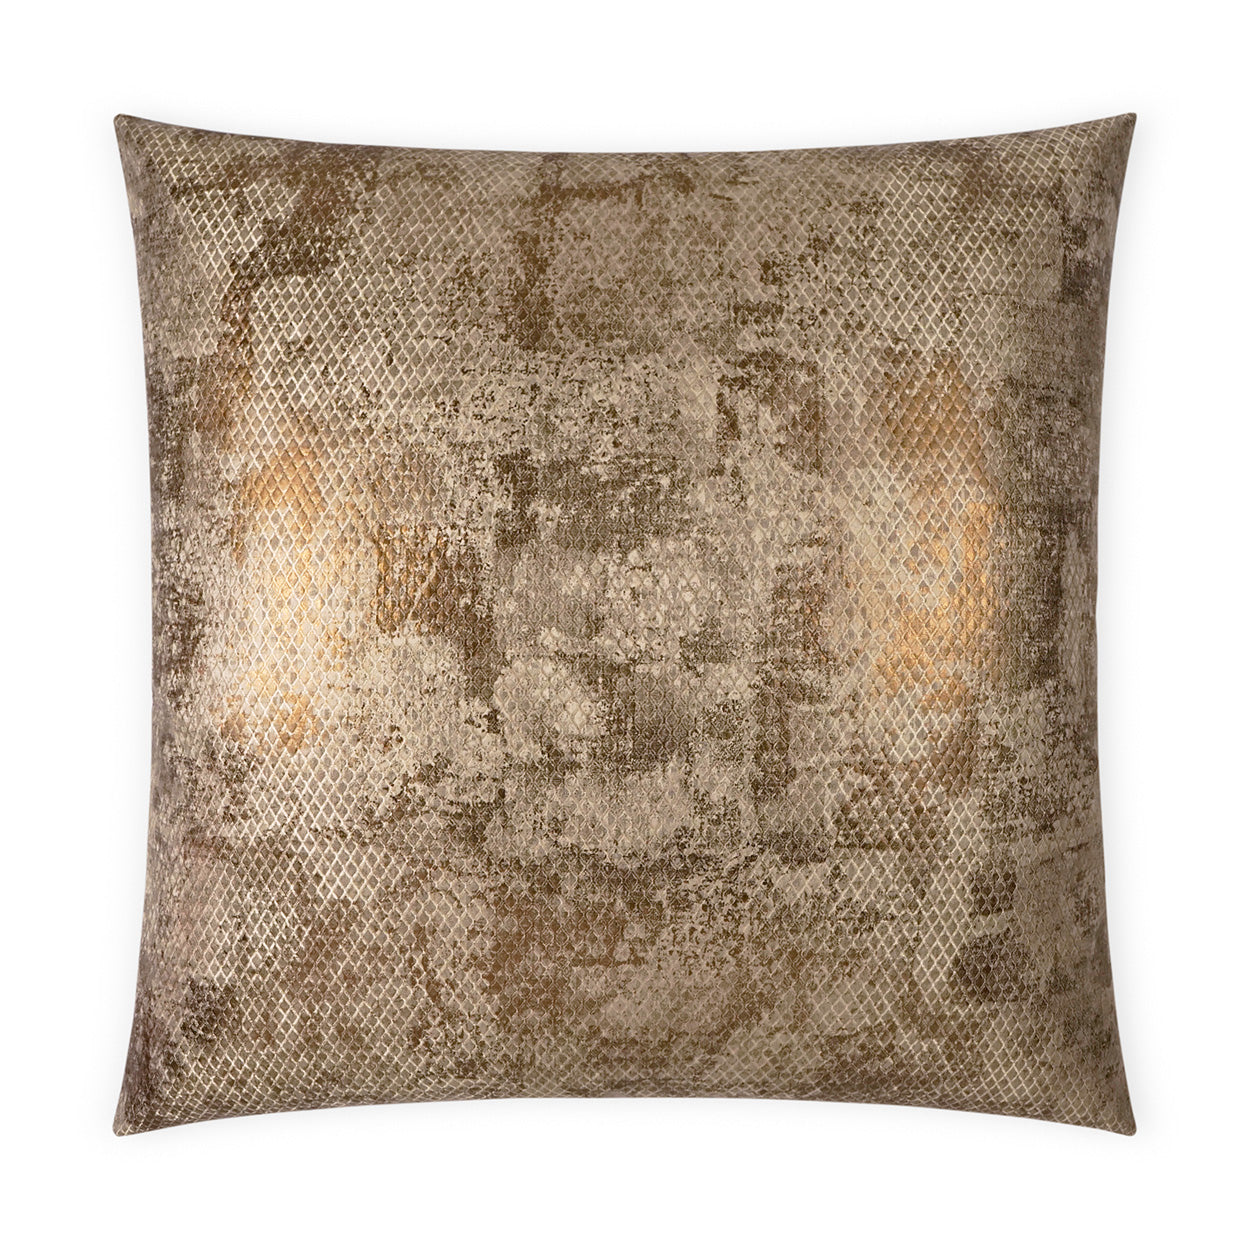 Luxury Pillow -  24" x 24" -  Pitone - Bronze; Shimmering abstract animal print